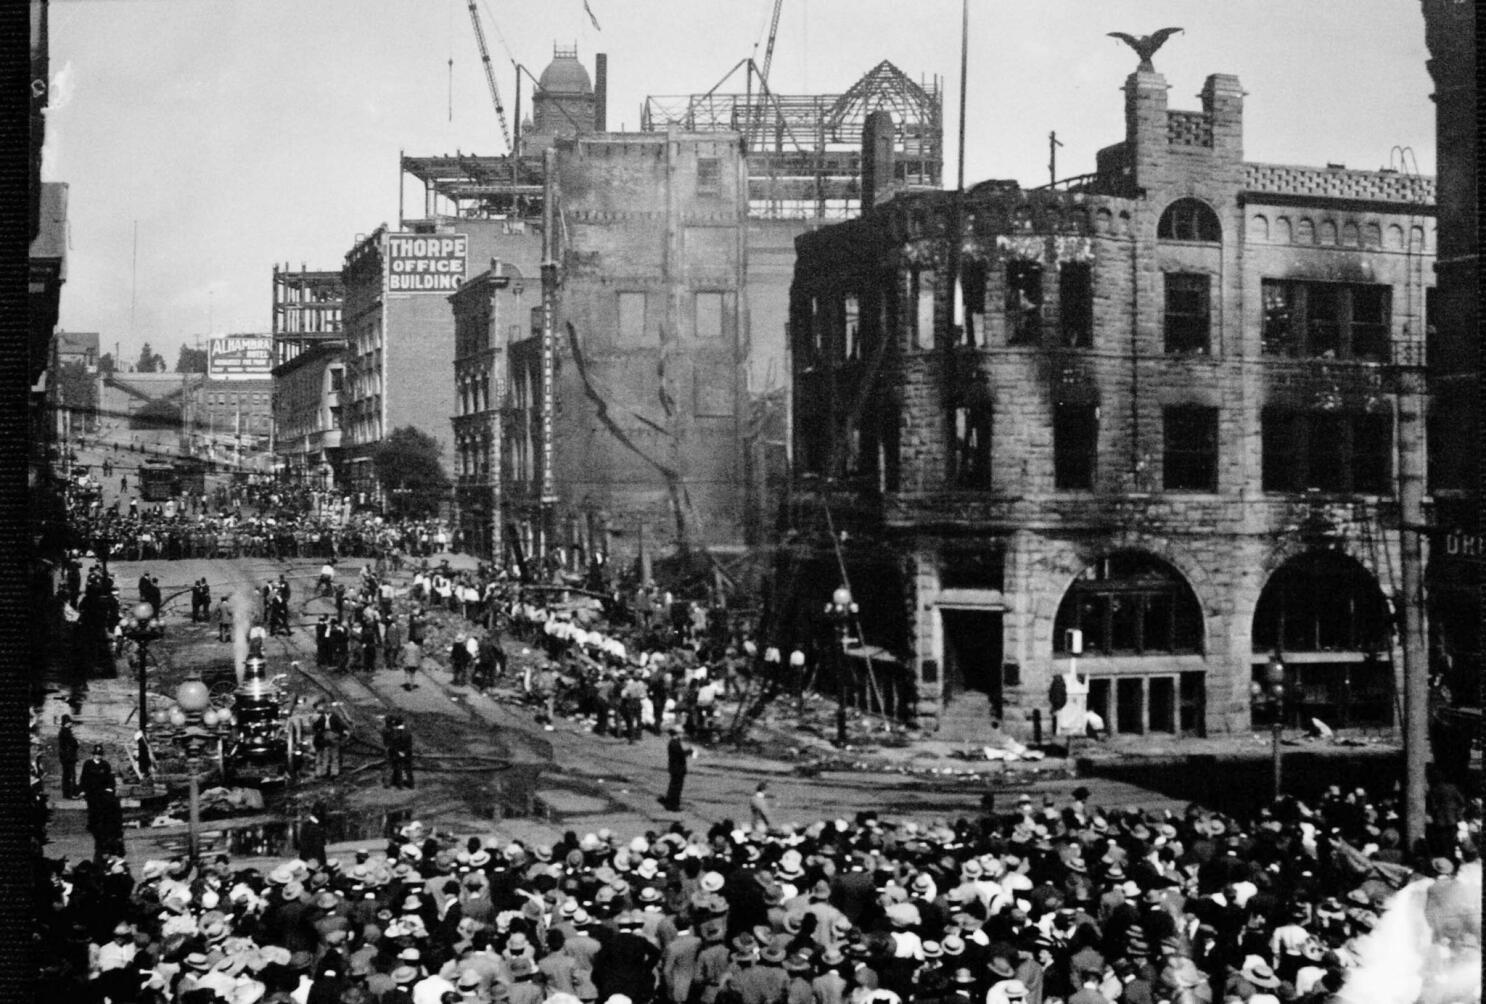 From the Archives: The 1910 bombing of the Los Angeles Times - Los